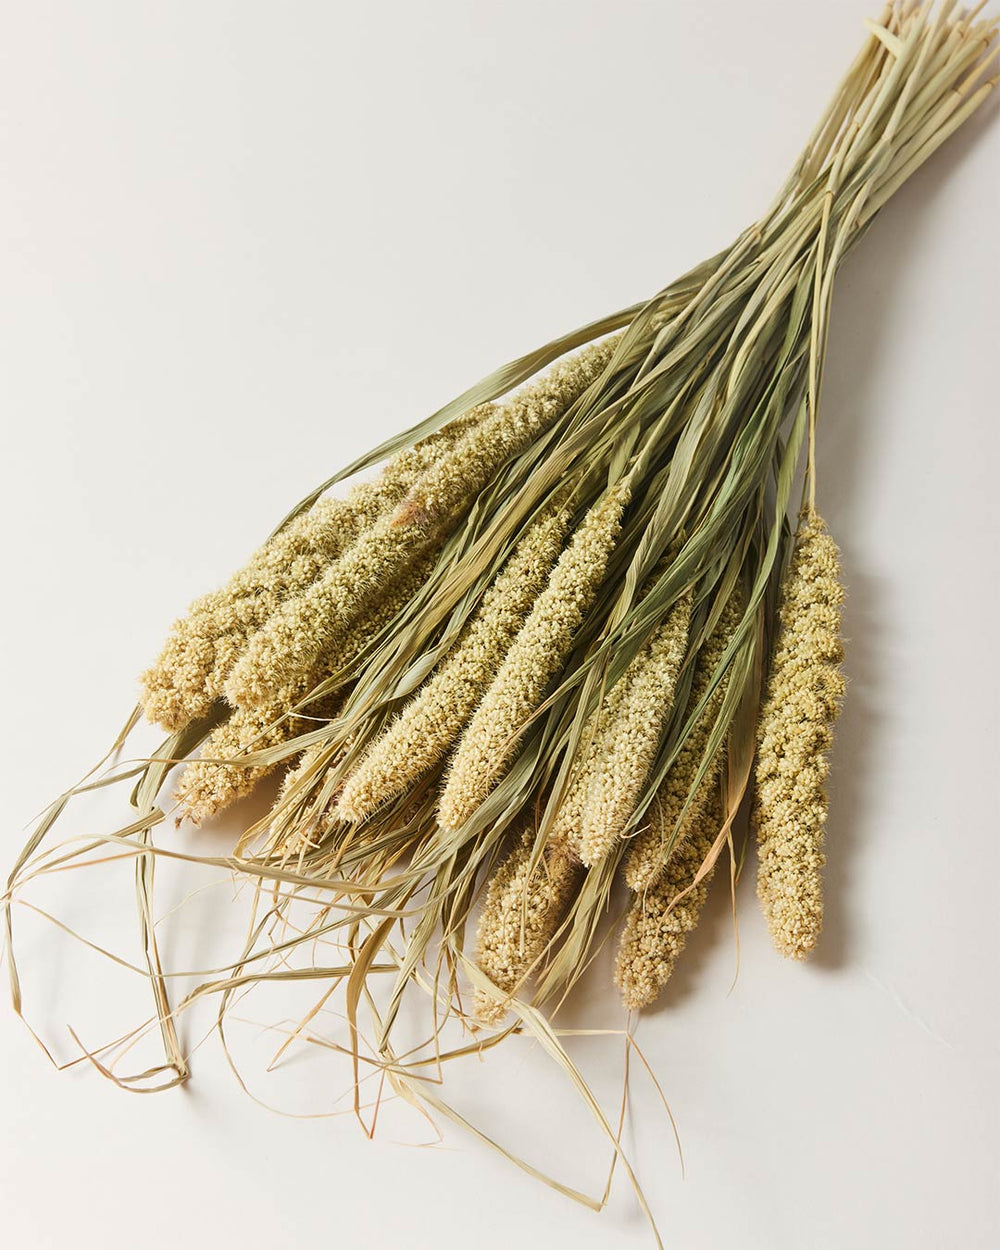 Dried Millet Bunch